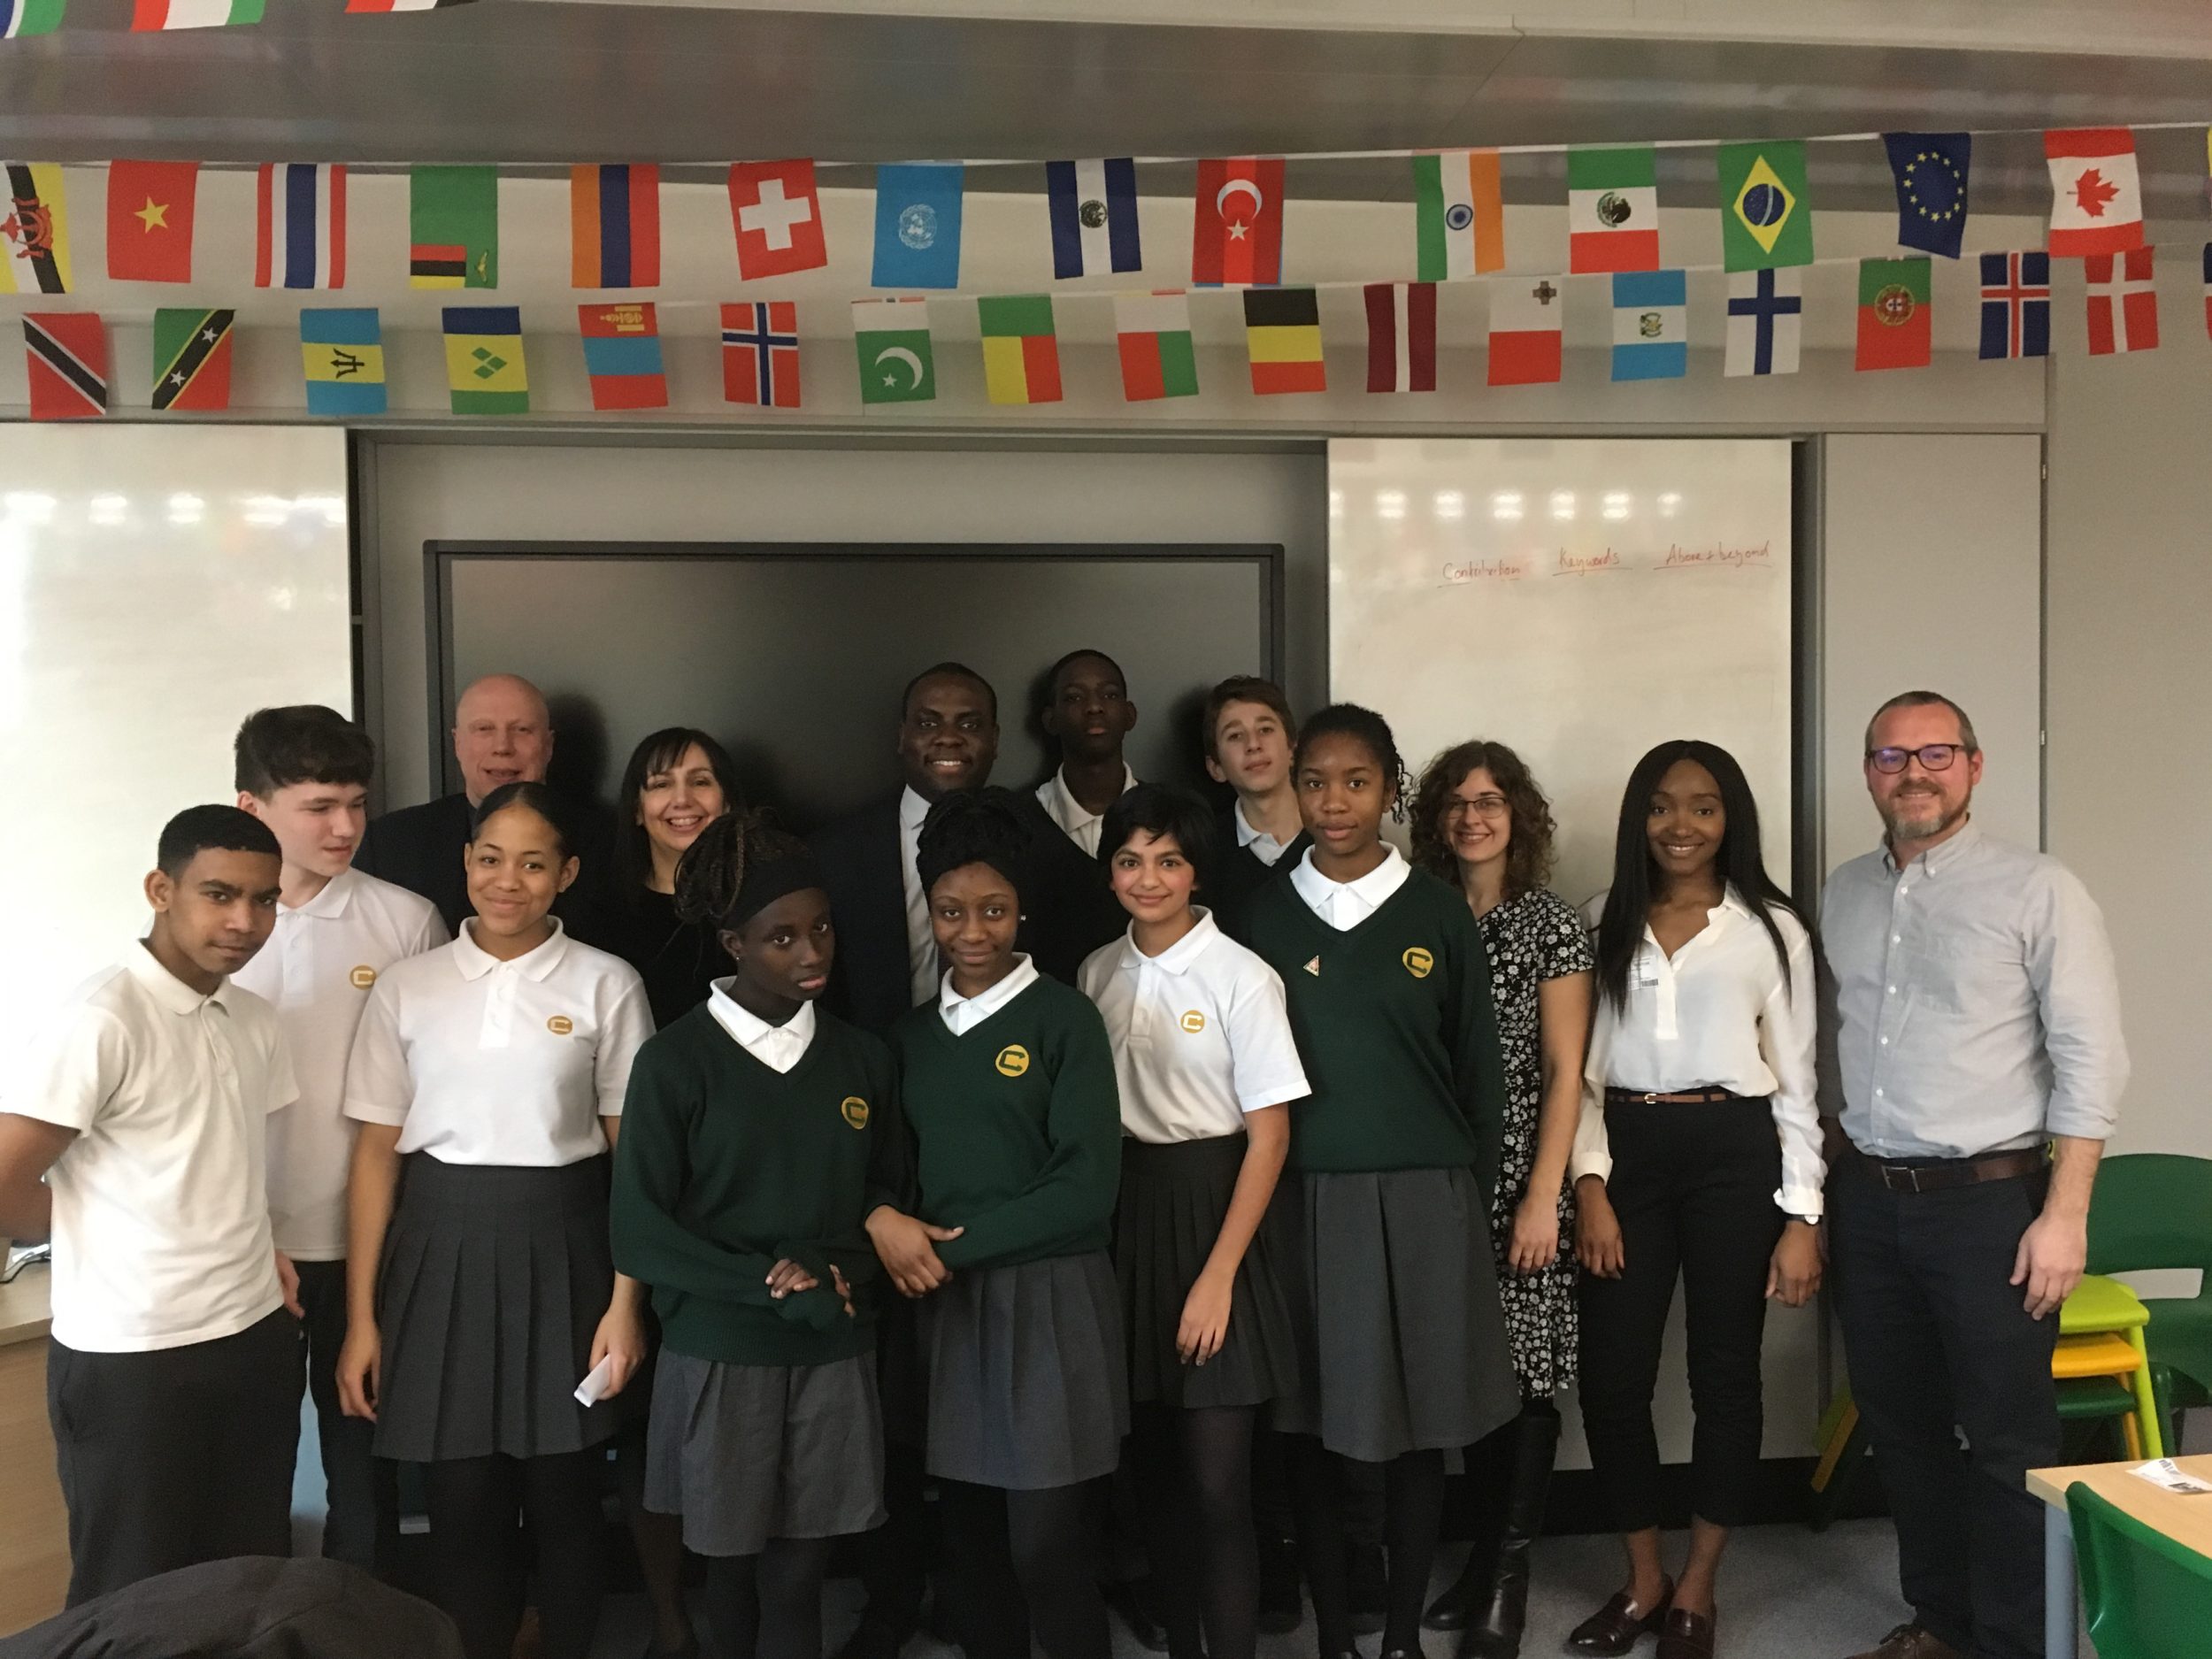 Pupils from Charter School with the Southwark team